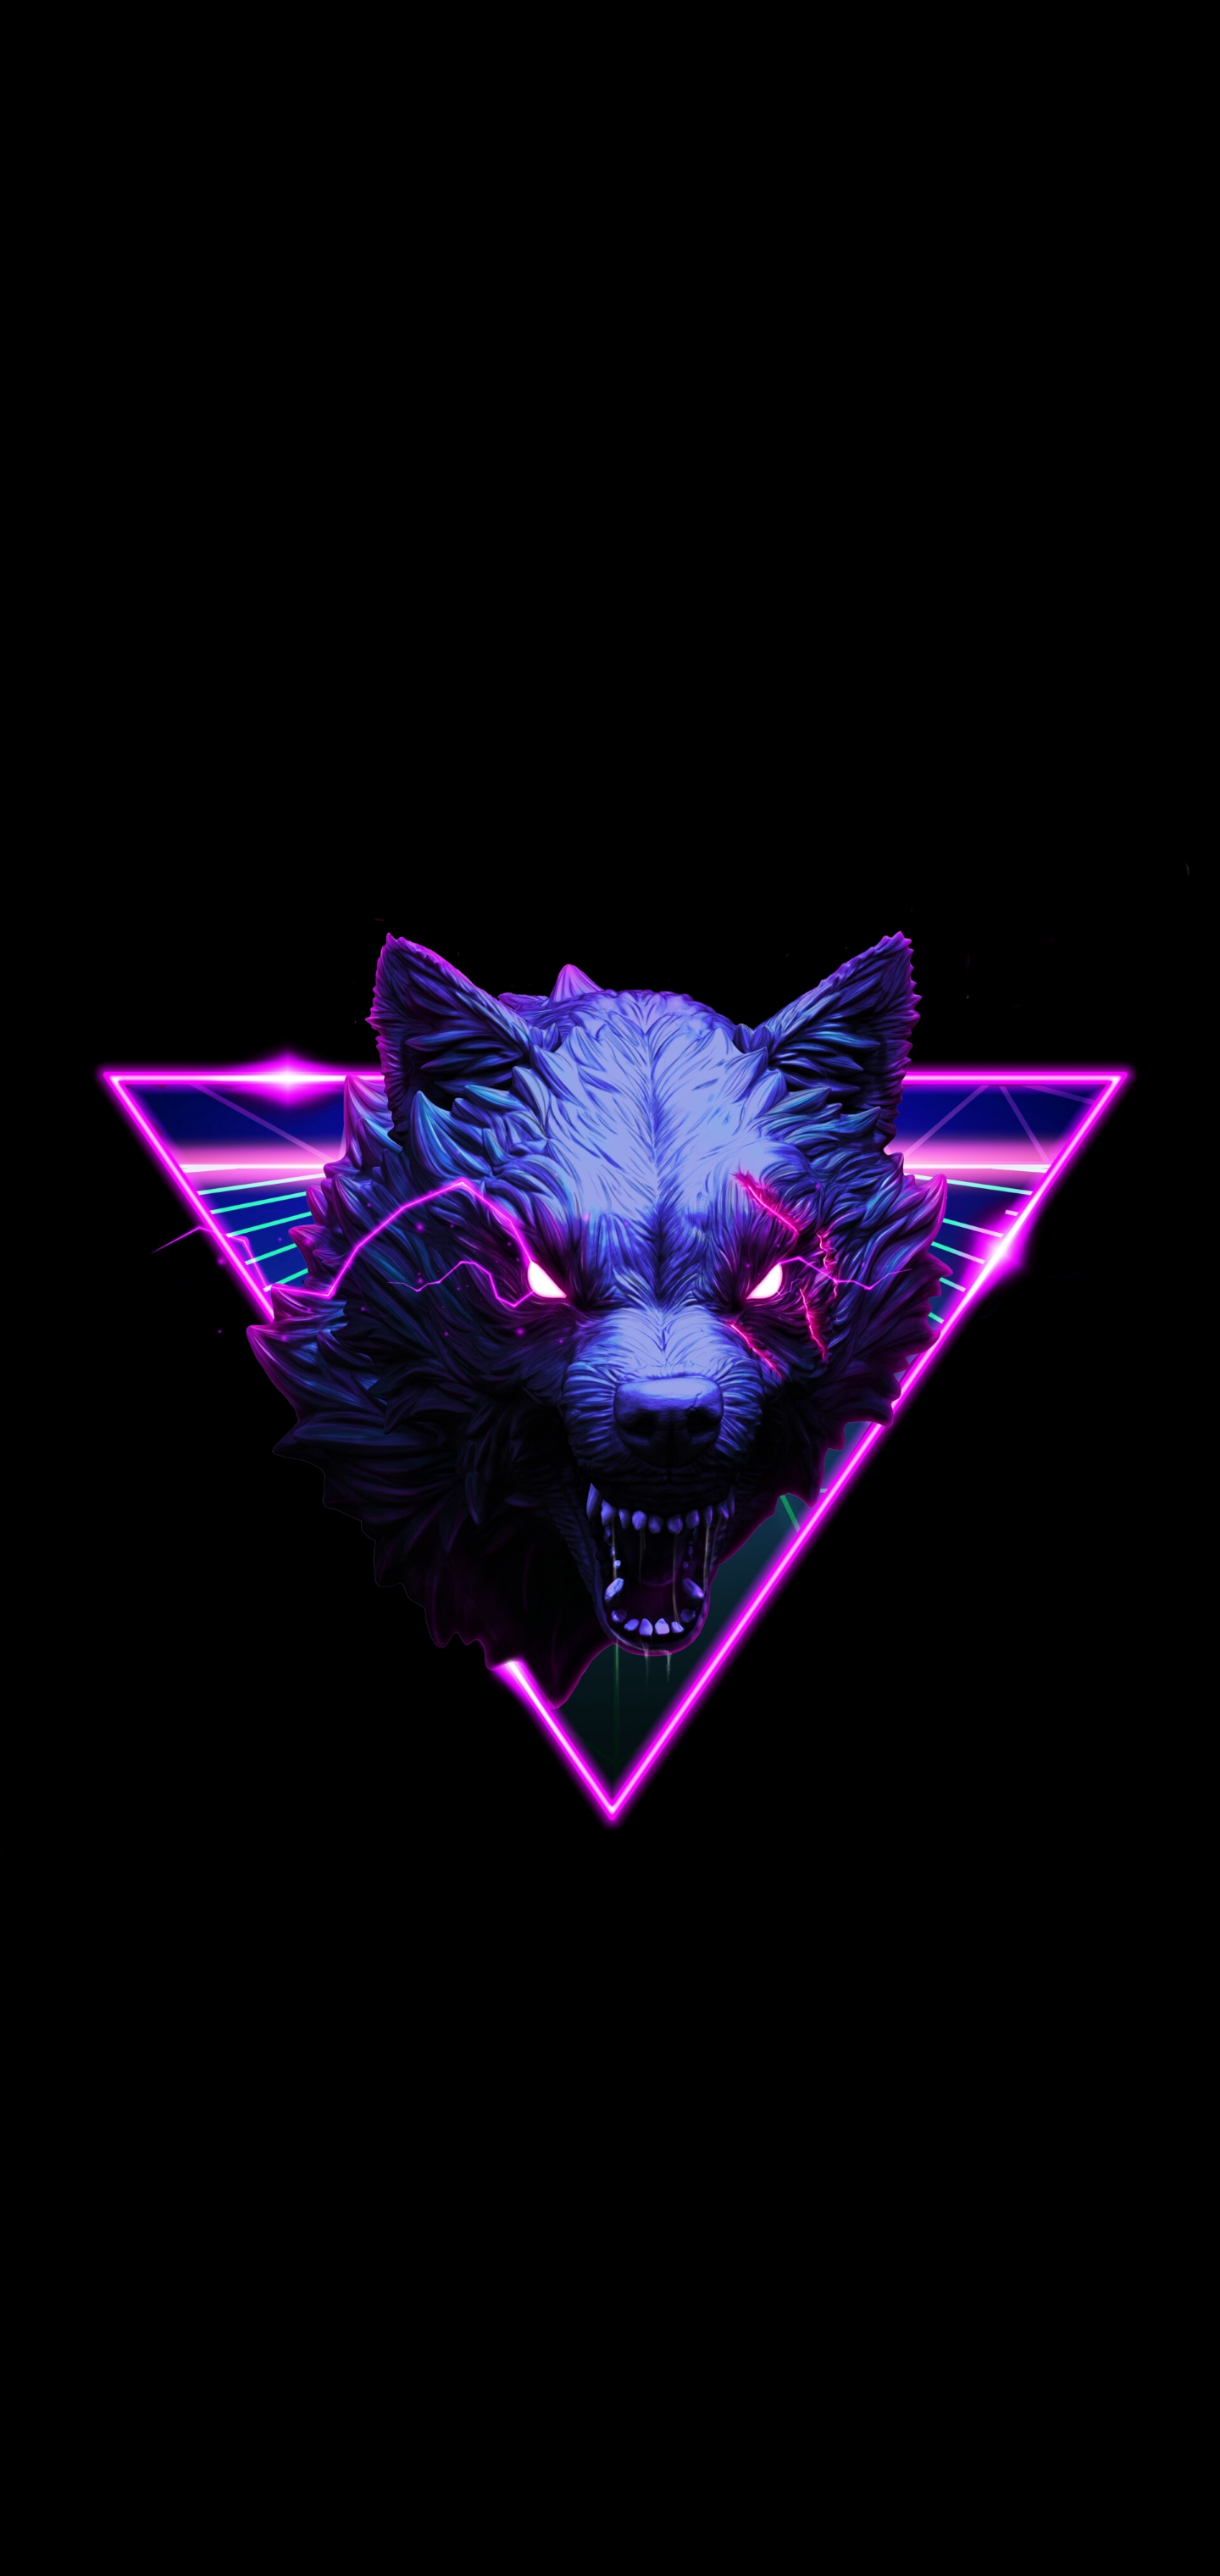 A wolf with neon eyes in the shape of triangle - Lion